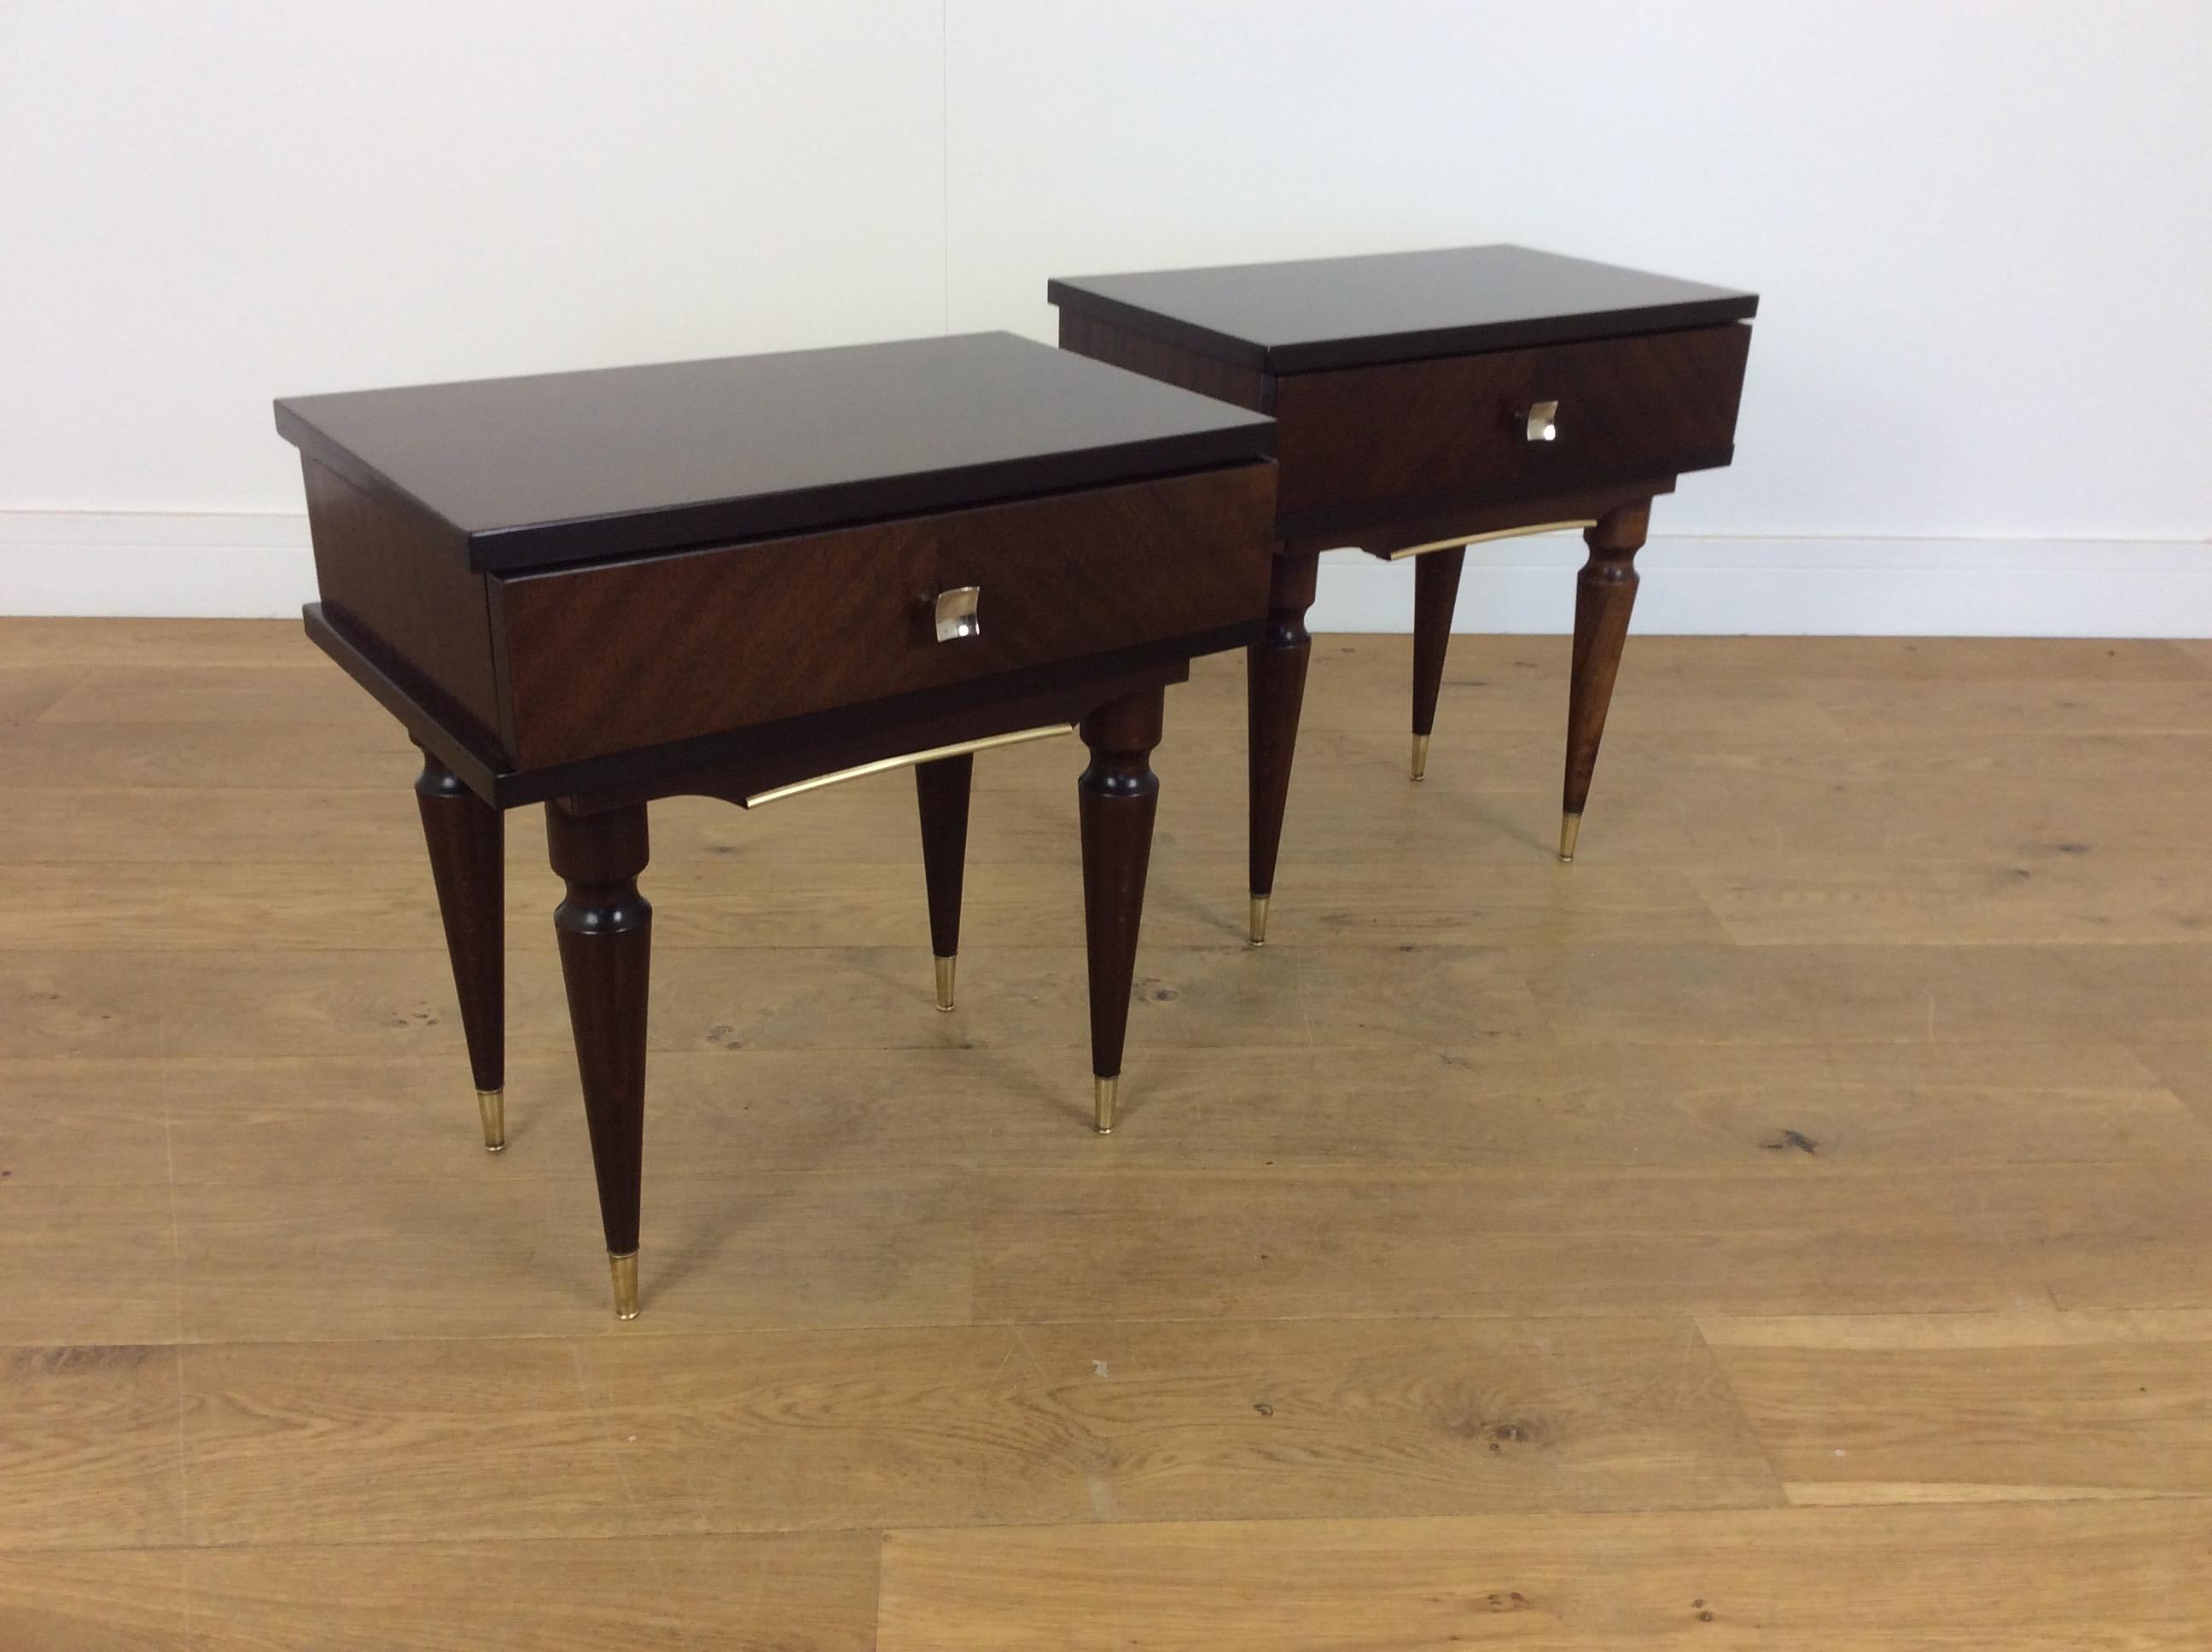 Midcentury nightstands.
A pair of mid century bedside tables in a Mahogany with polished brass detail.
Measures: 51 cm H x 50 cm W x 31 cm D
Italy, circa 1960.